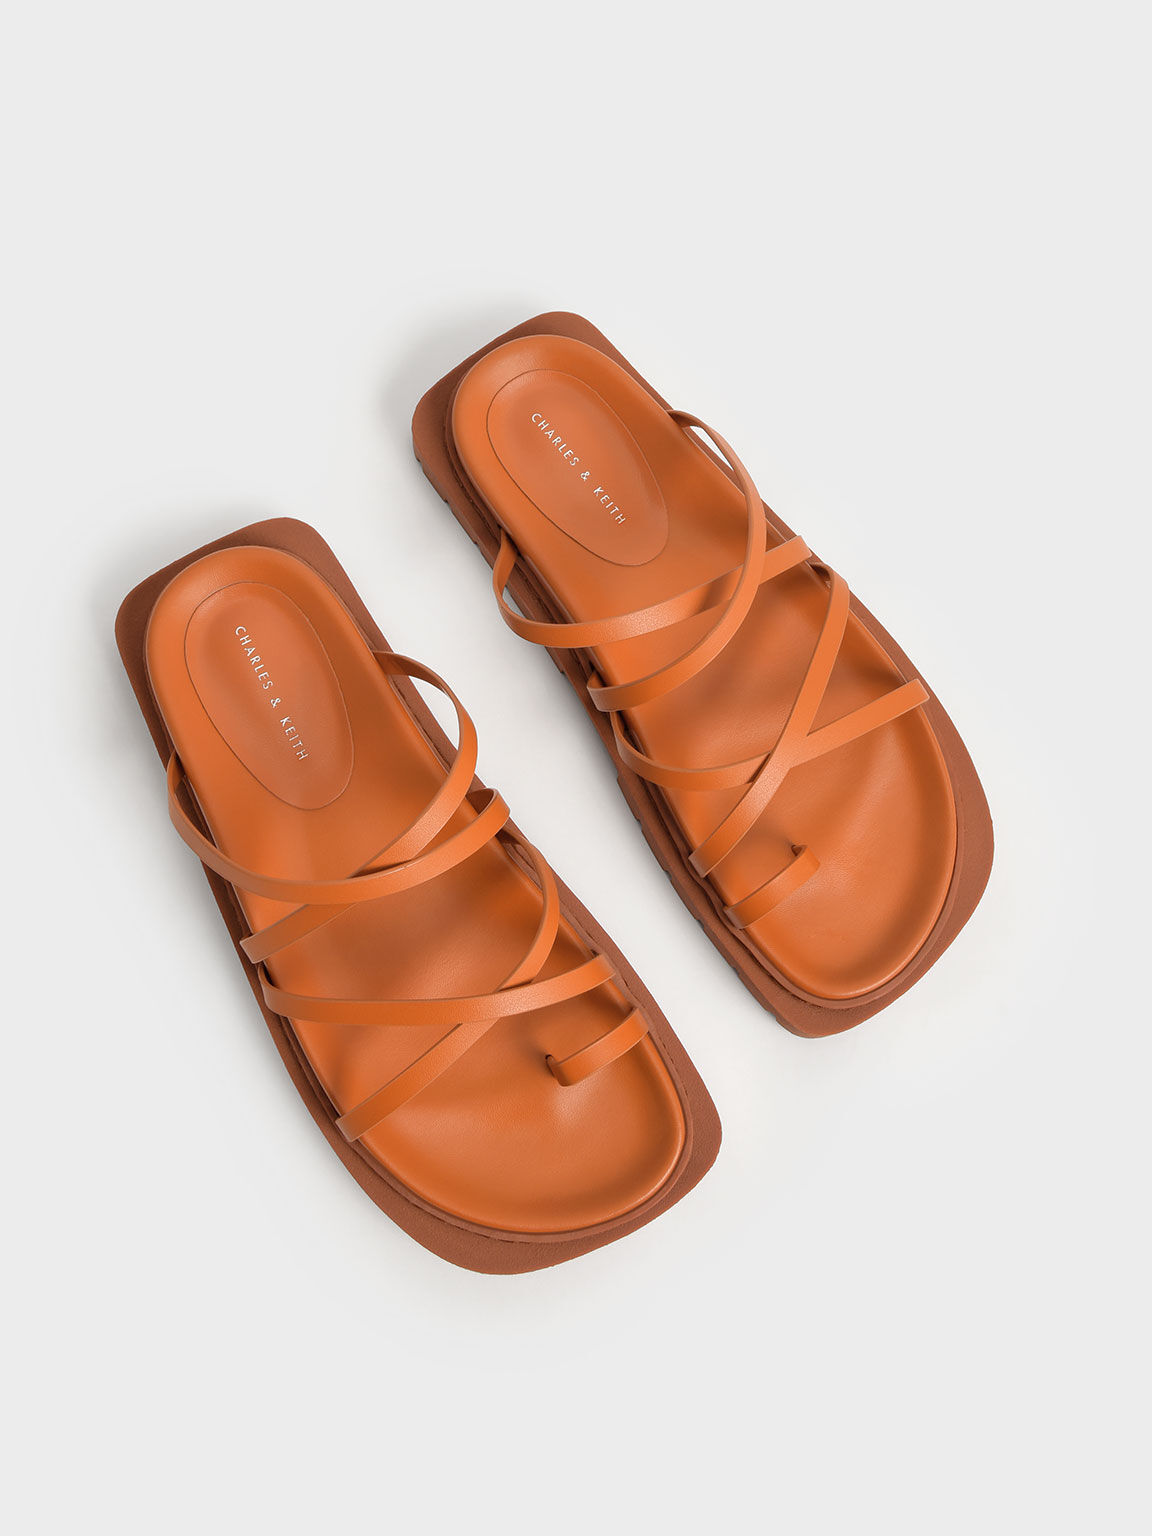 Strappy Cleated Sole Sandals, Orange, hi-res